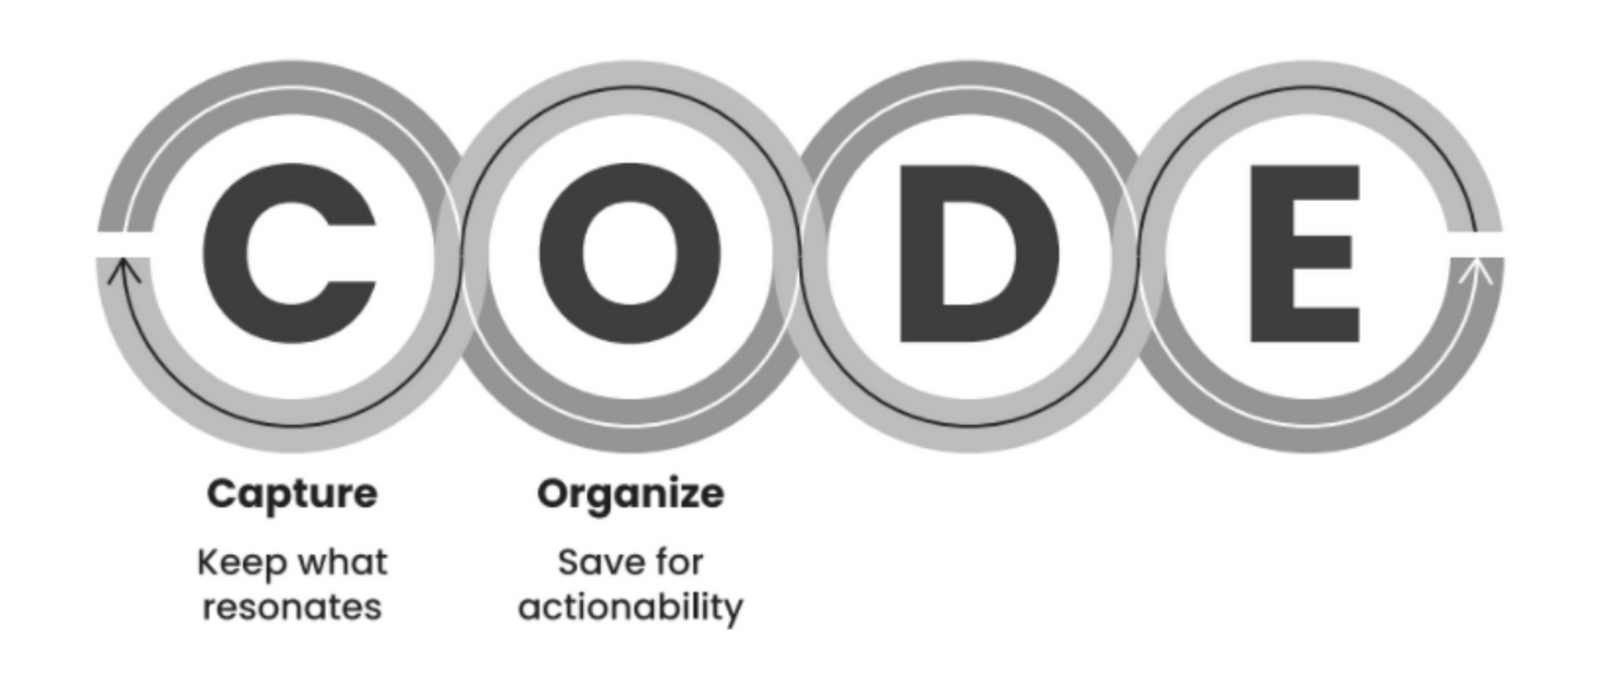 Organize: Save for actionability